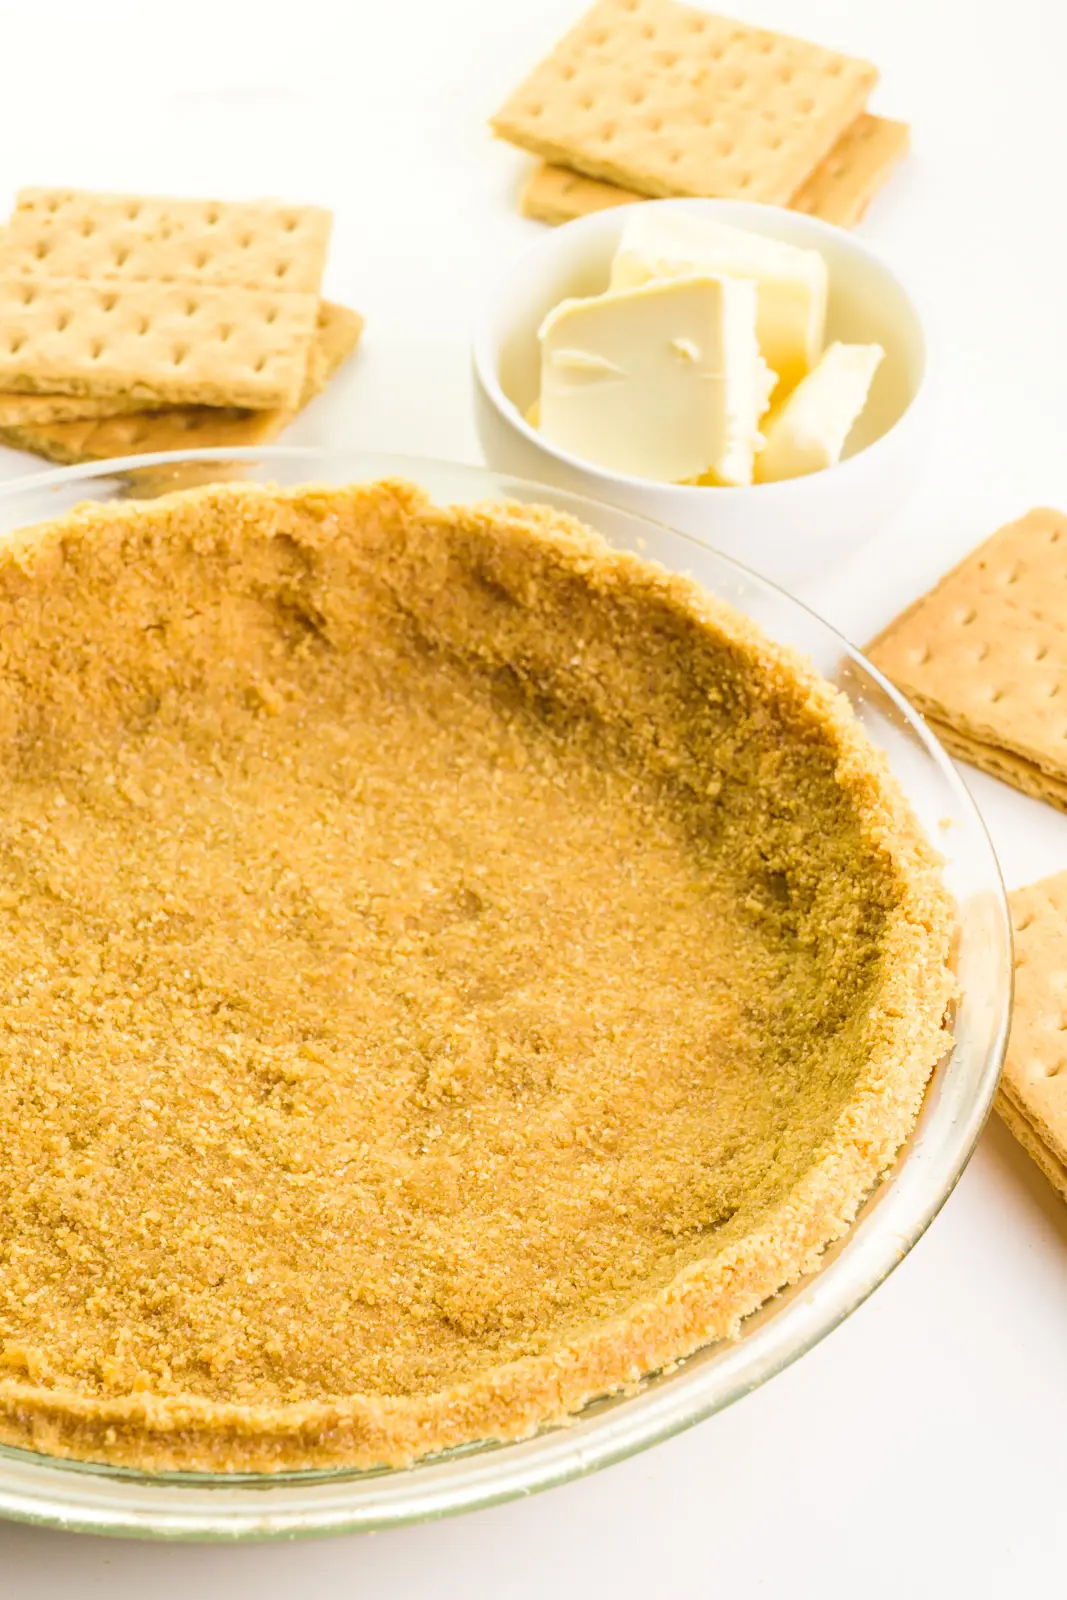 A graham cracker crust is in a glass pie pan. There are graham crackers and vegan butter around it.